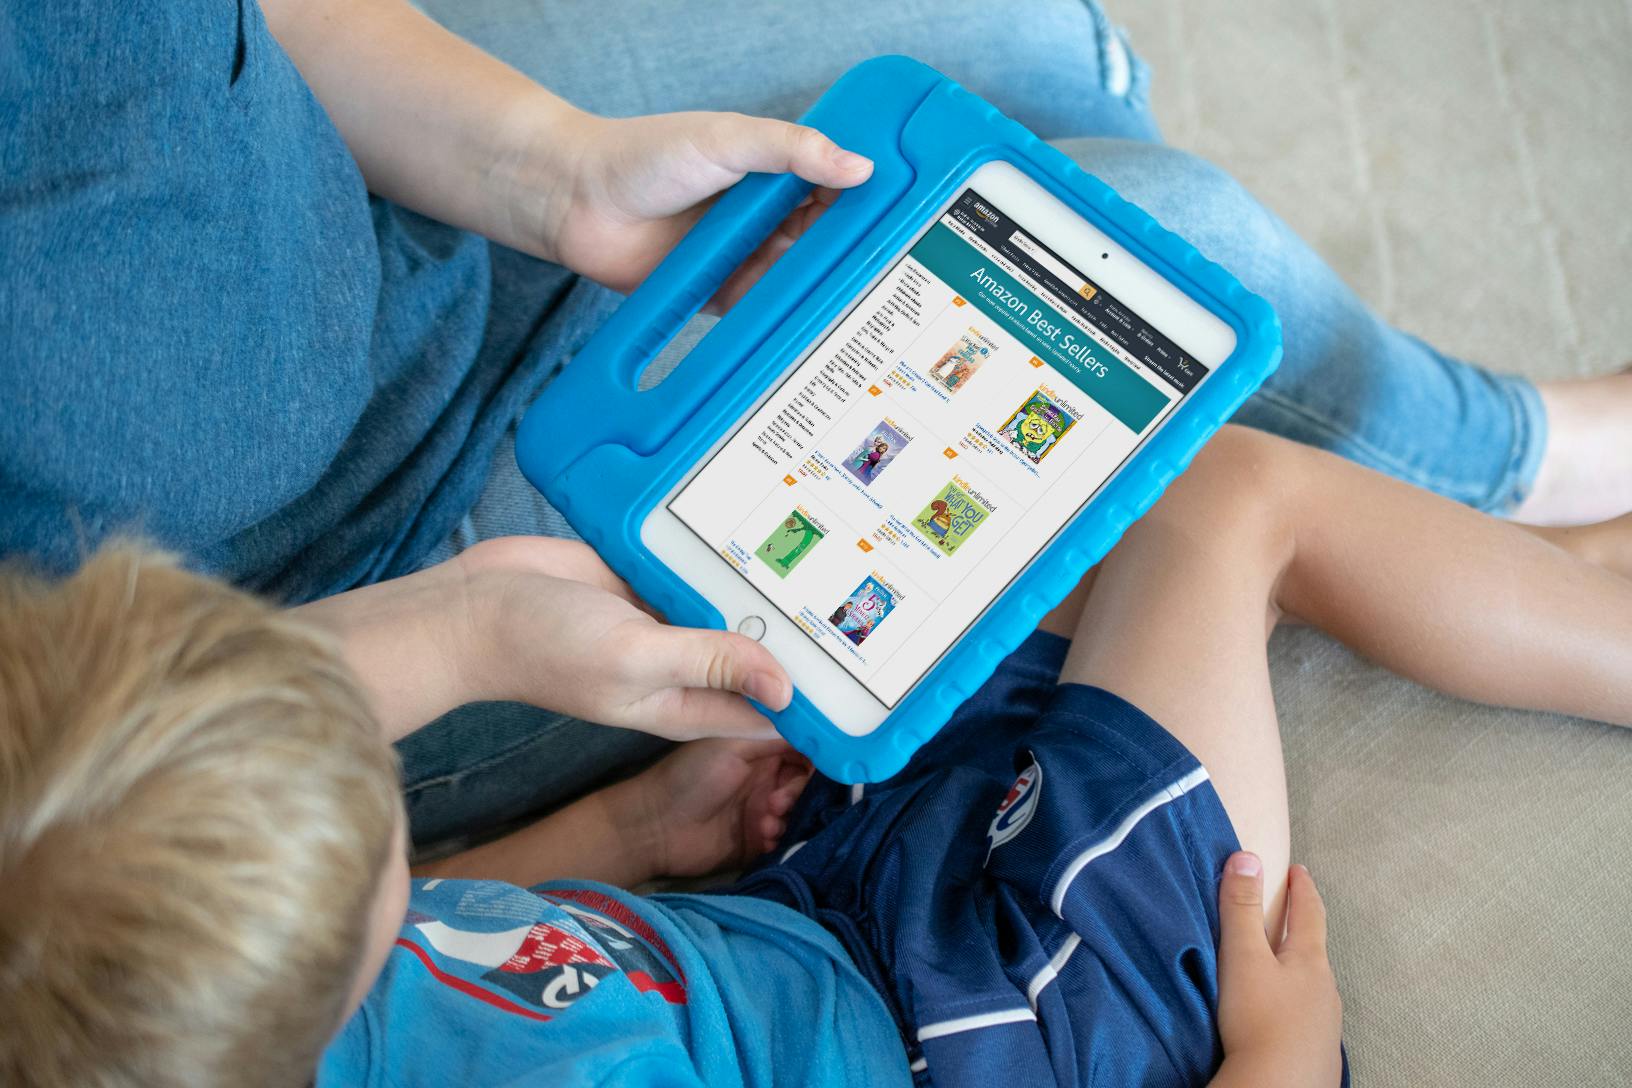 A small boy sitting with a woman on a sofa, looking at a tablet displaying free amazon kindle books for kids.